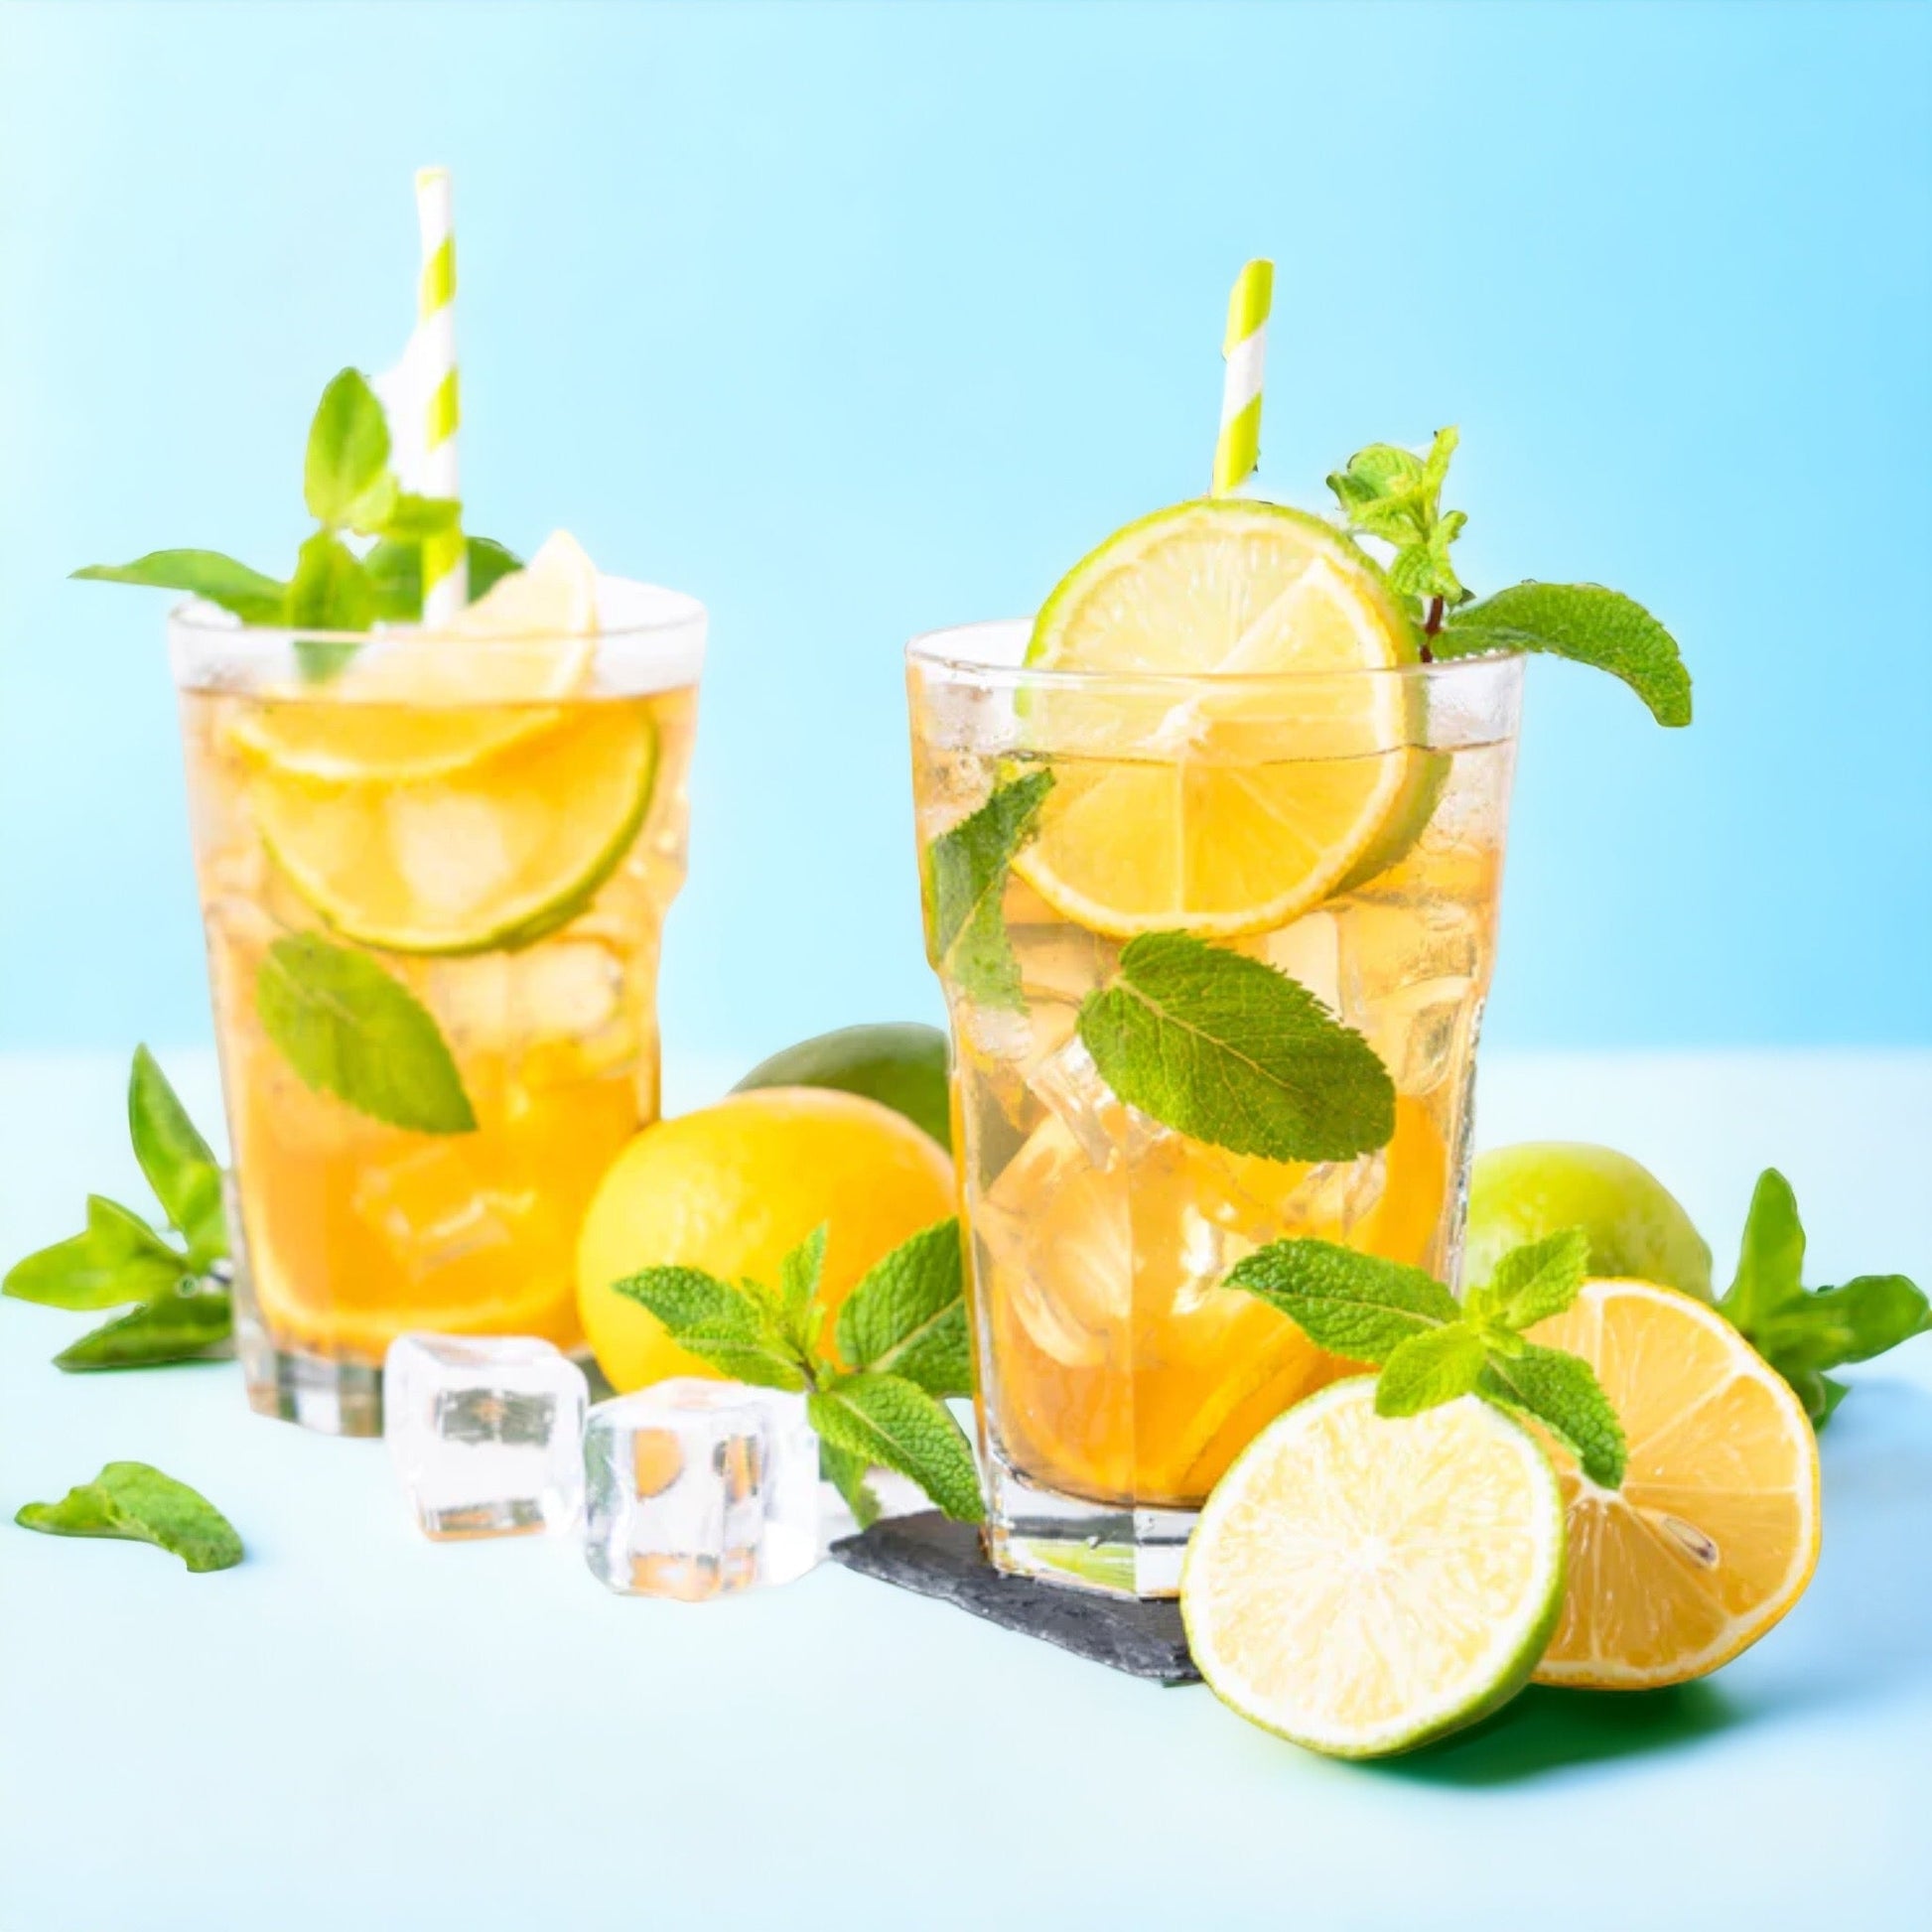 Vivid yellow  peppermint iced tea with cubes of ice and fresh mint leaves